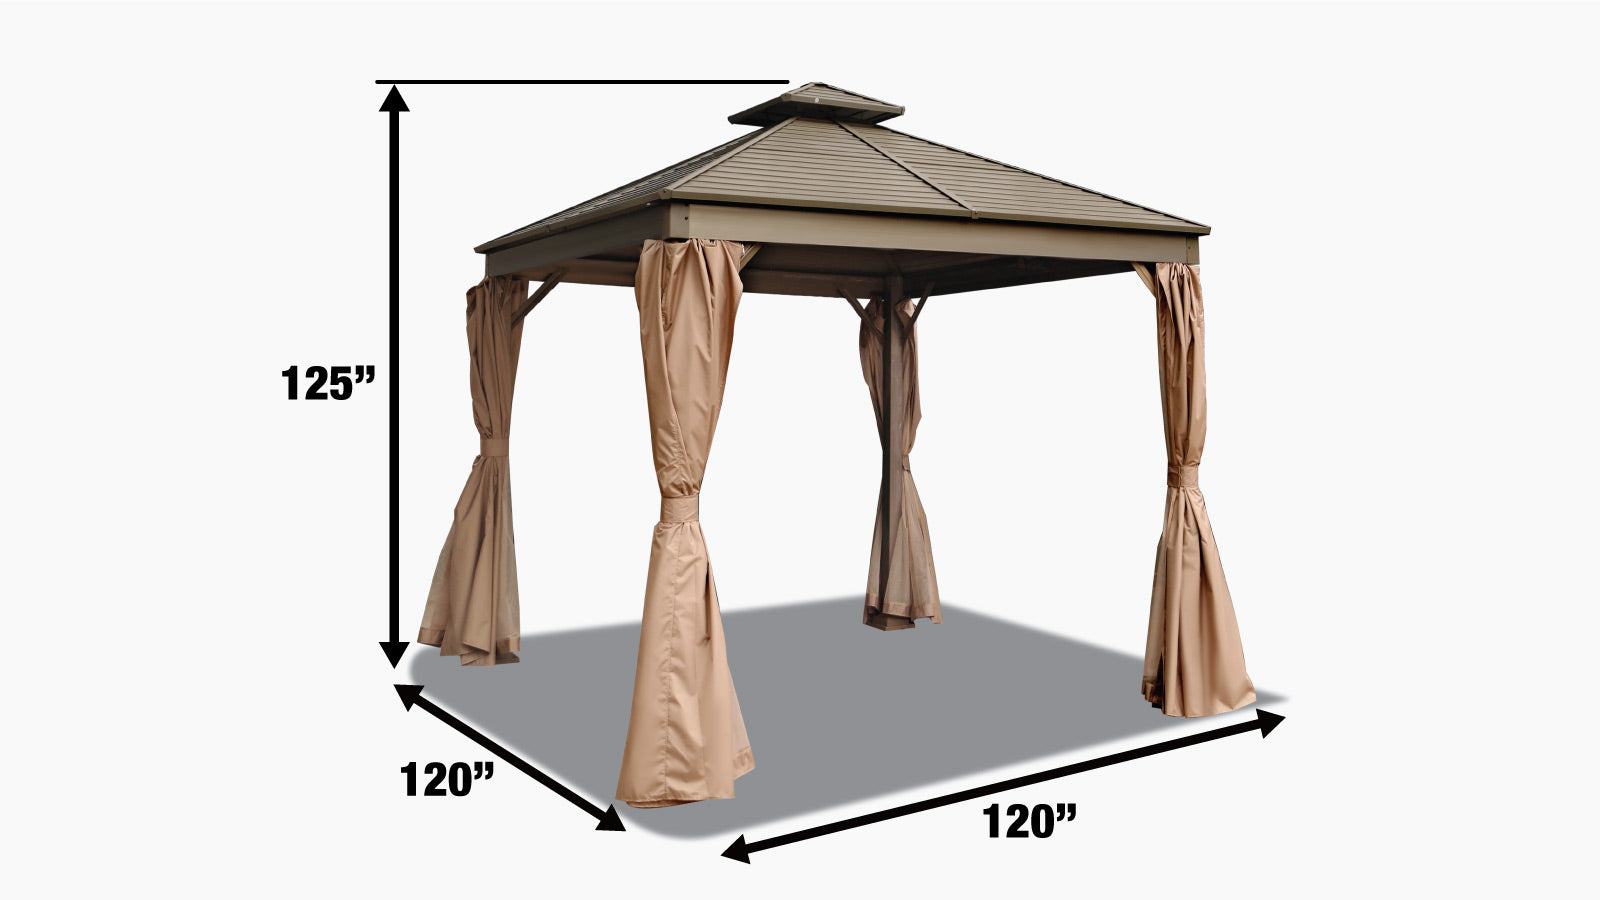 TMG Industrial 10’ x 10’ Hardtop, Double Tier Steel Roof Patio Gazebo, Mosquito Nets & Curtains Included, TMG-LGZ11-specifications-image